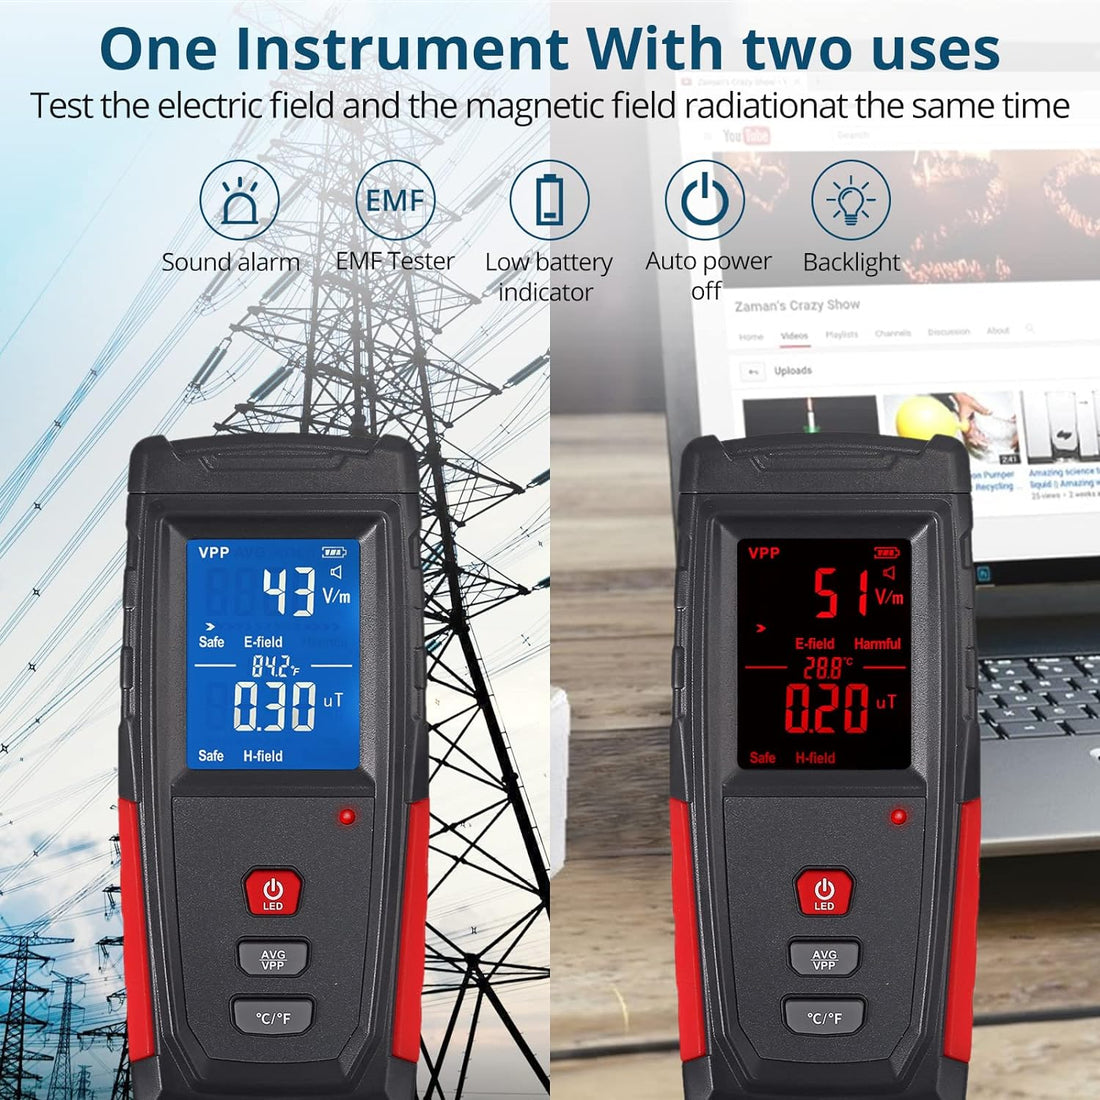 ALLmeter EMF Meter,Radiation Detector,Electromagnetic Field Tester,Magnetic Field Emission Tester with LCD Display,Sound-Light Alarm,and Data Locking